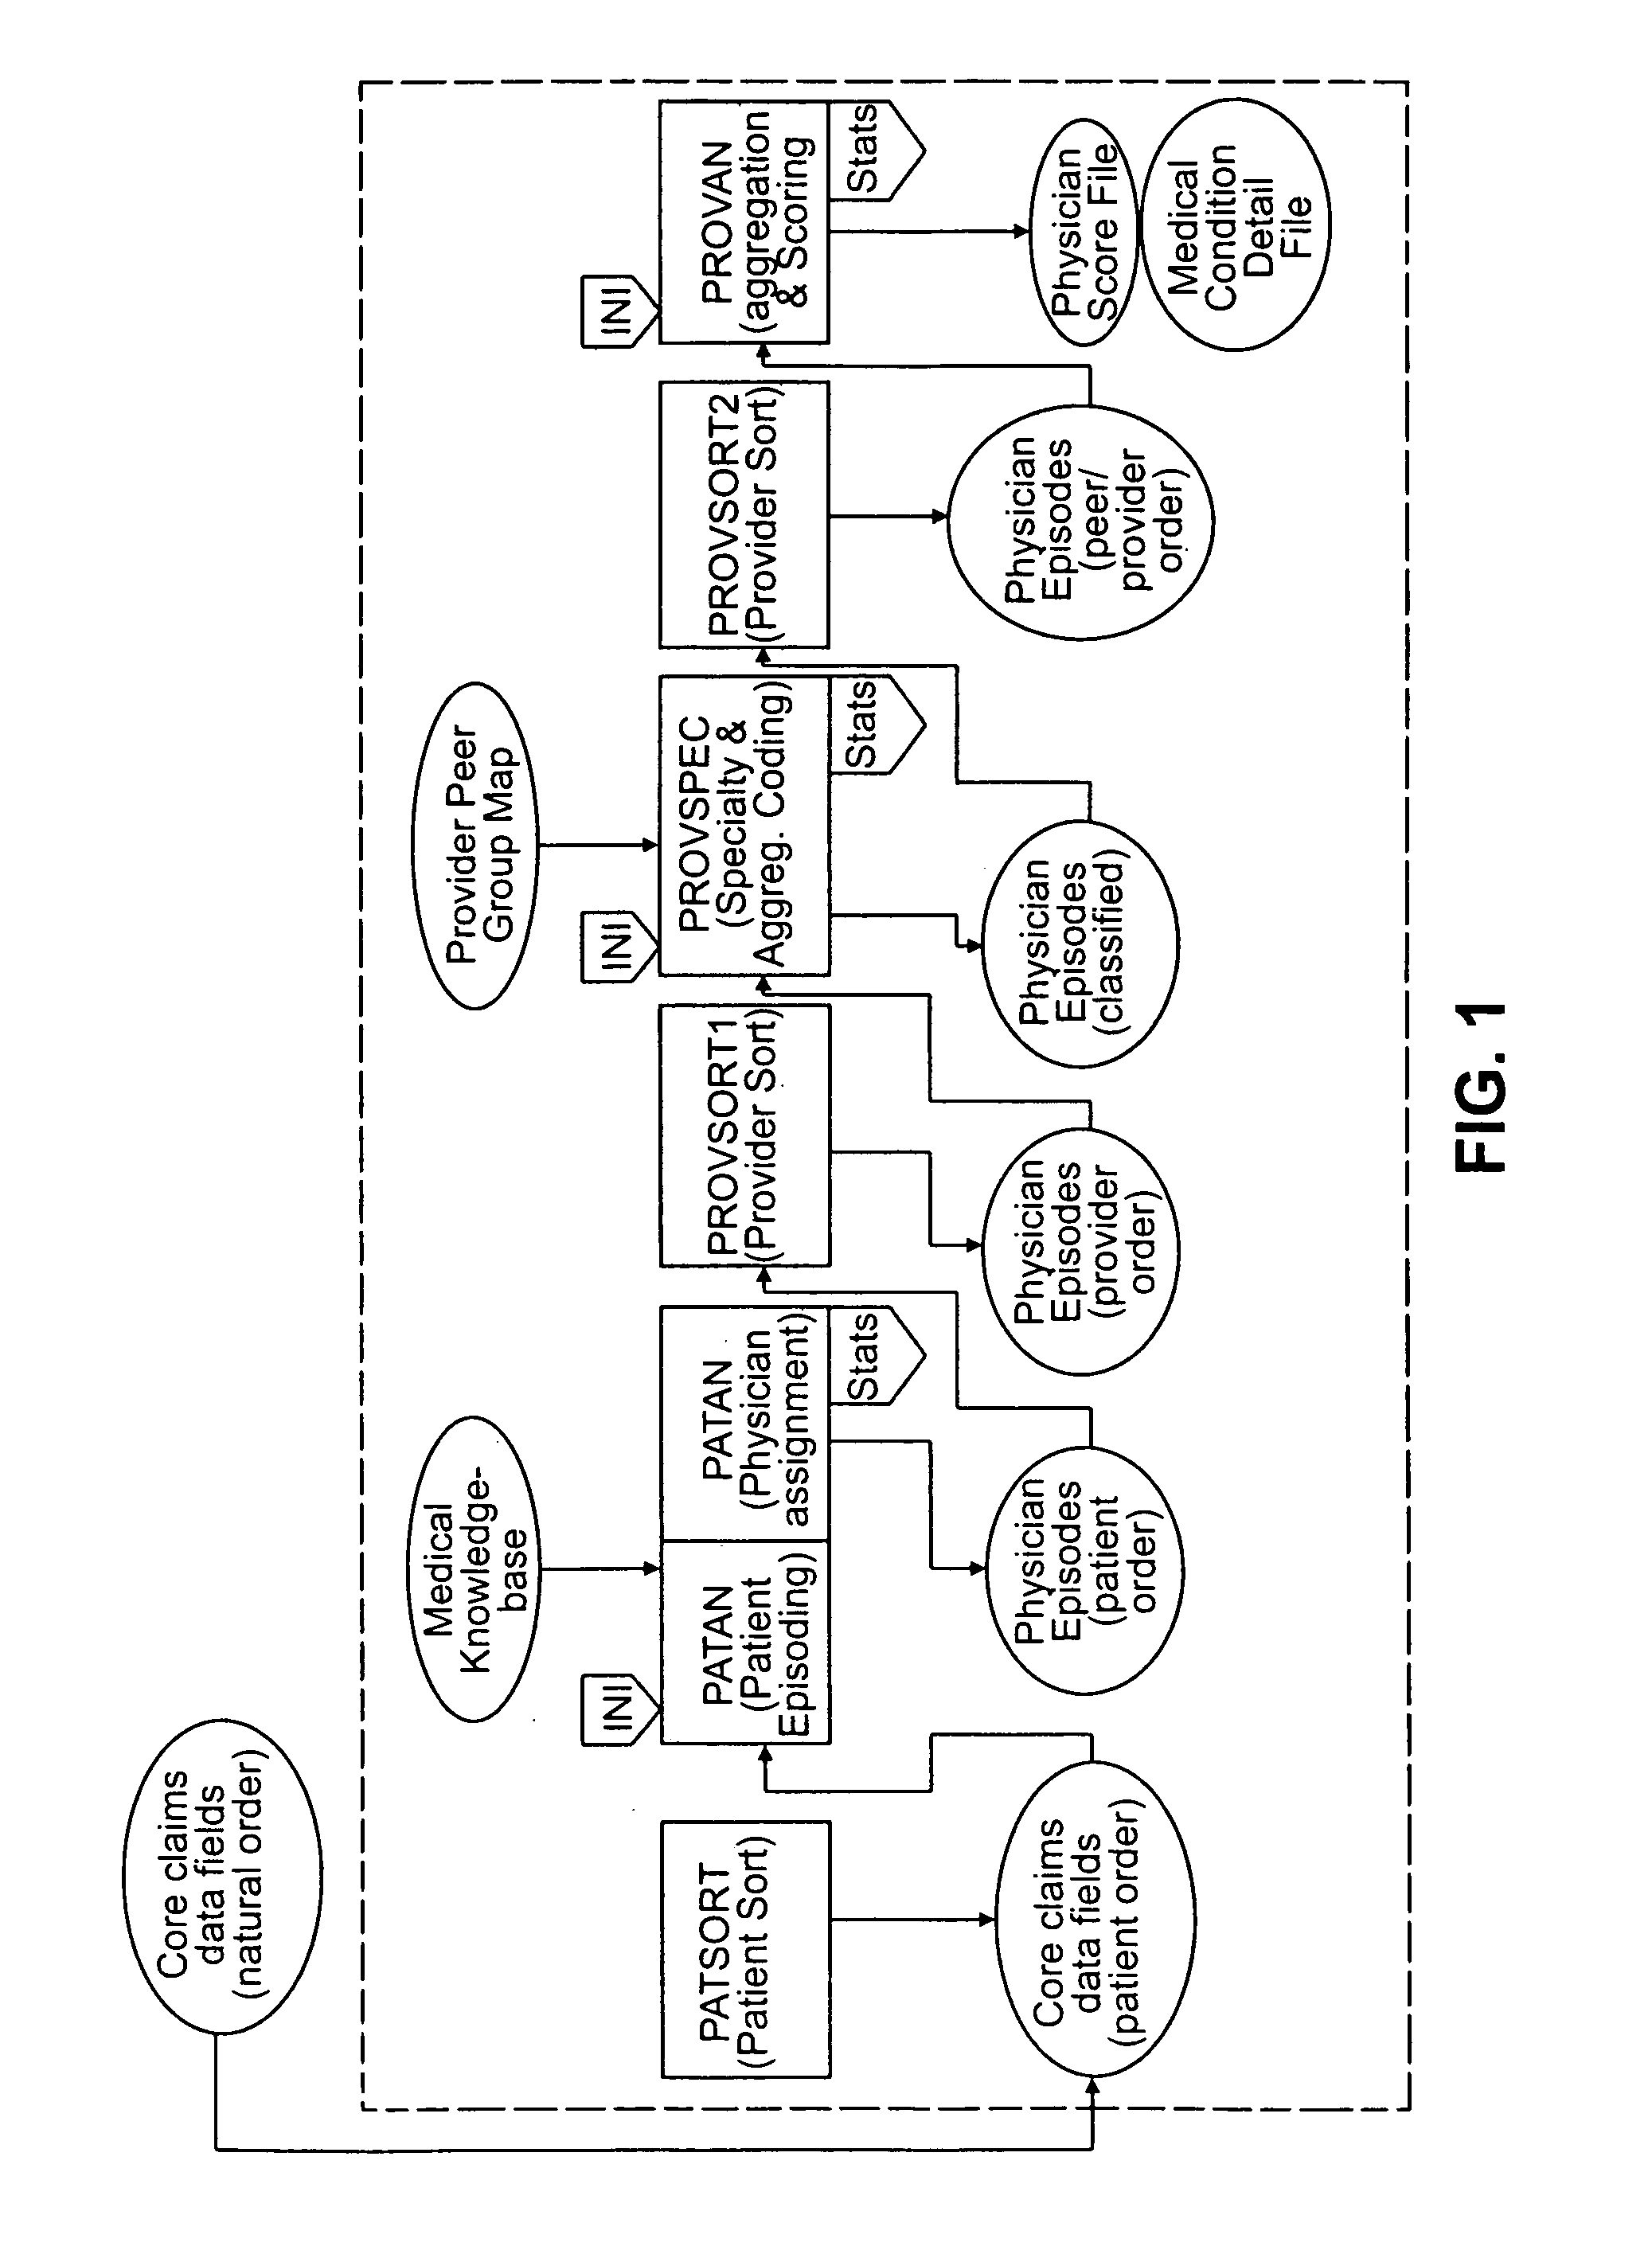 Method, system, and computer program product for physician efficiency measurement and patient health risk stratification